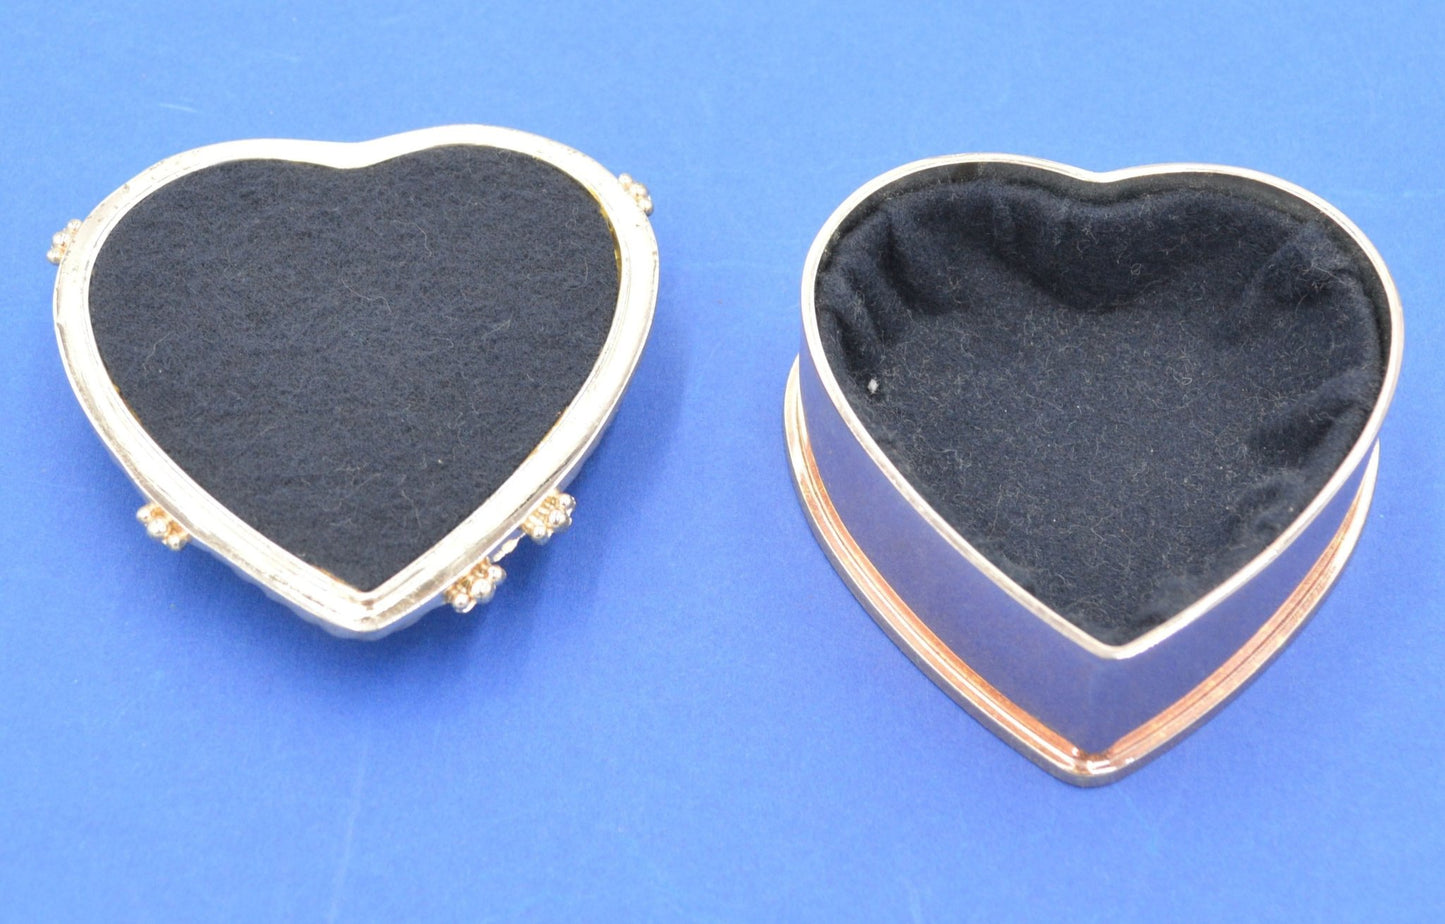 FOUR HEART SHAPED METAL TRINKET BOXES(PREVIOUSLY OWNED) GOOD CONDITION - TMD167207